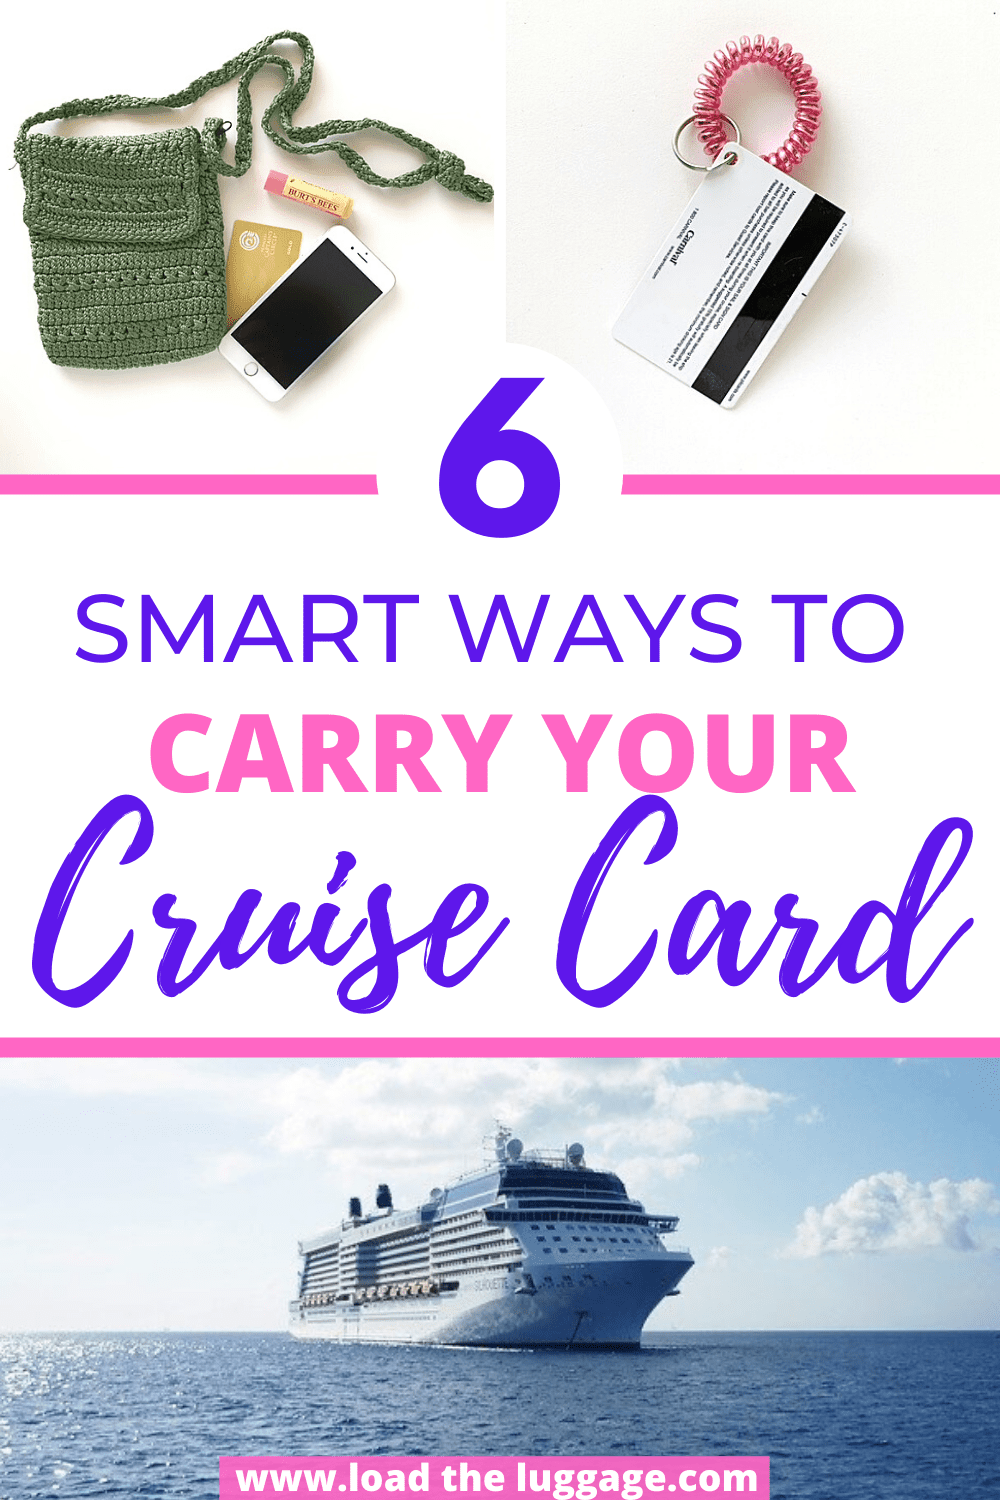 cruise card meaning